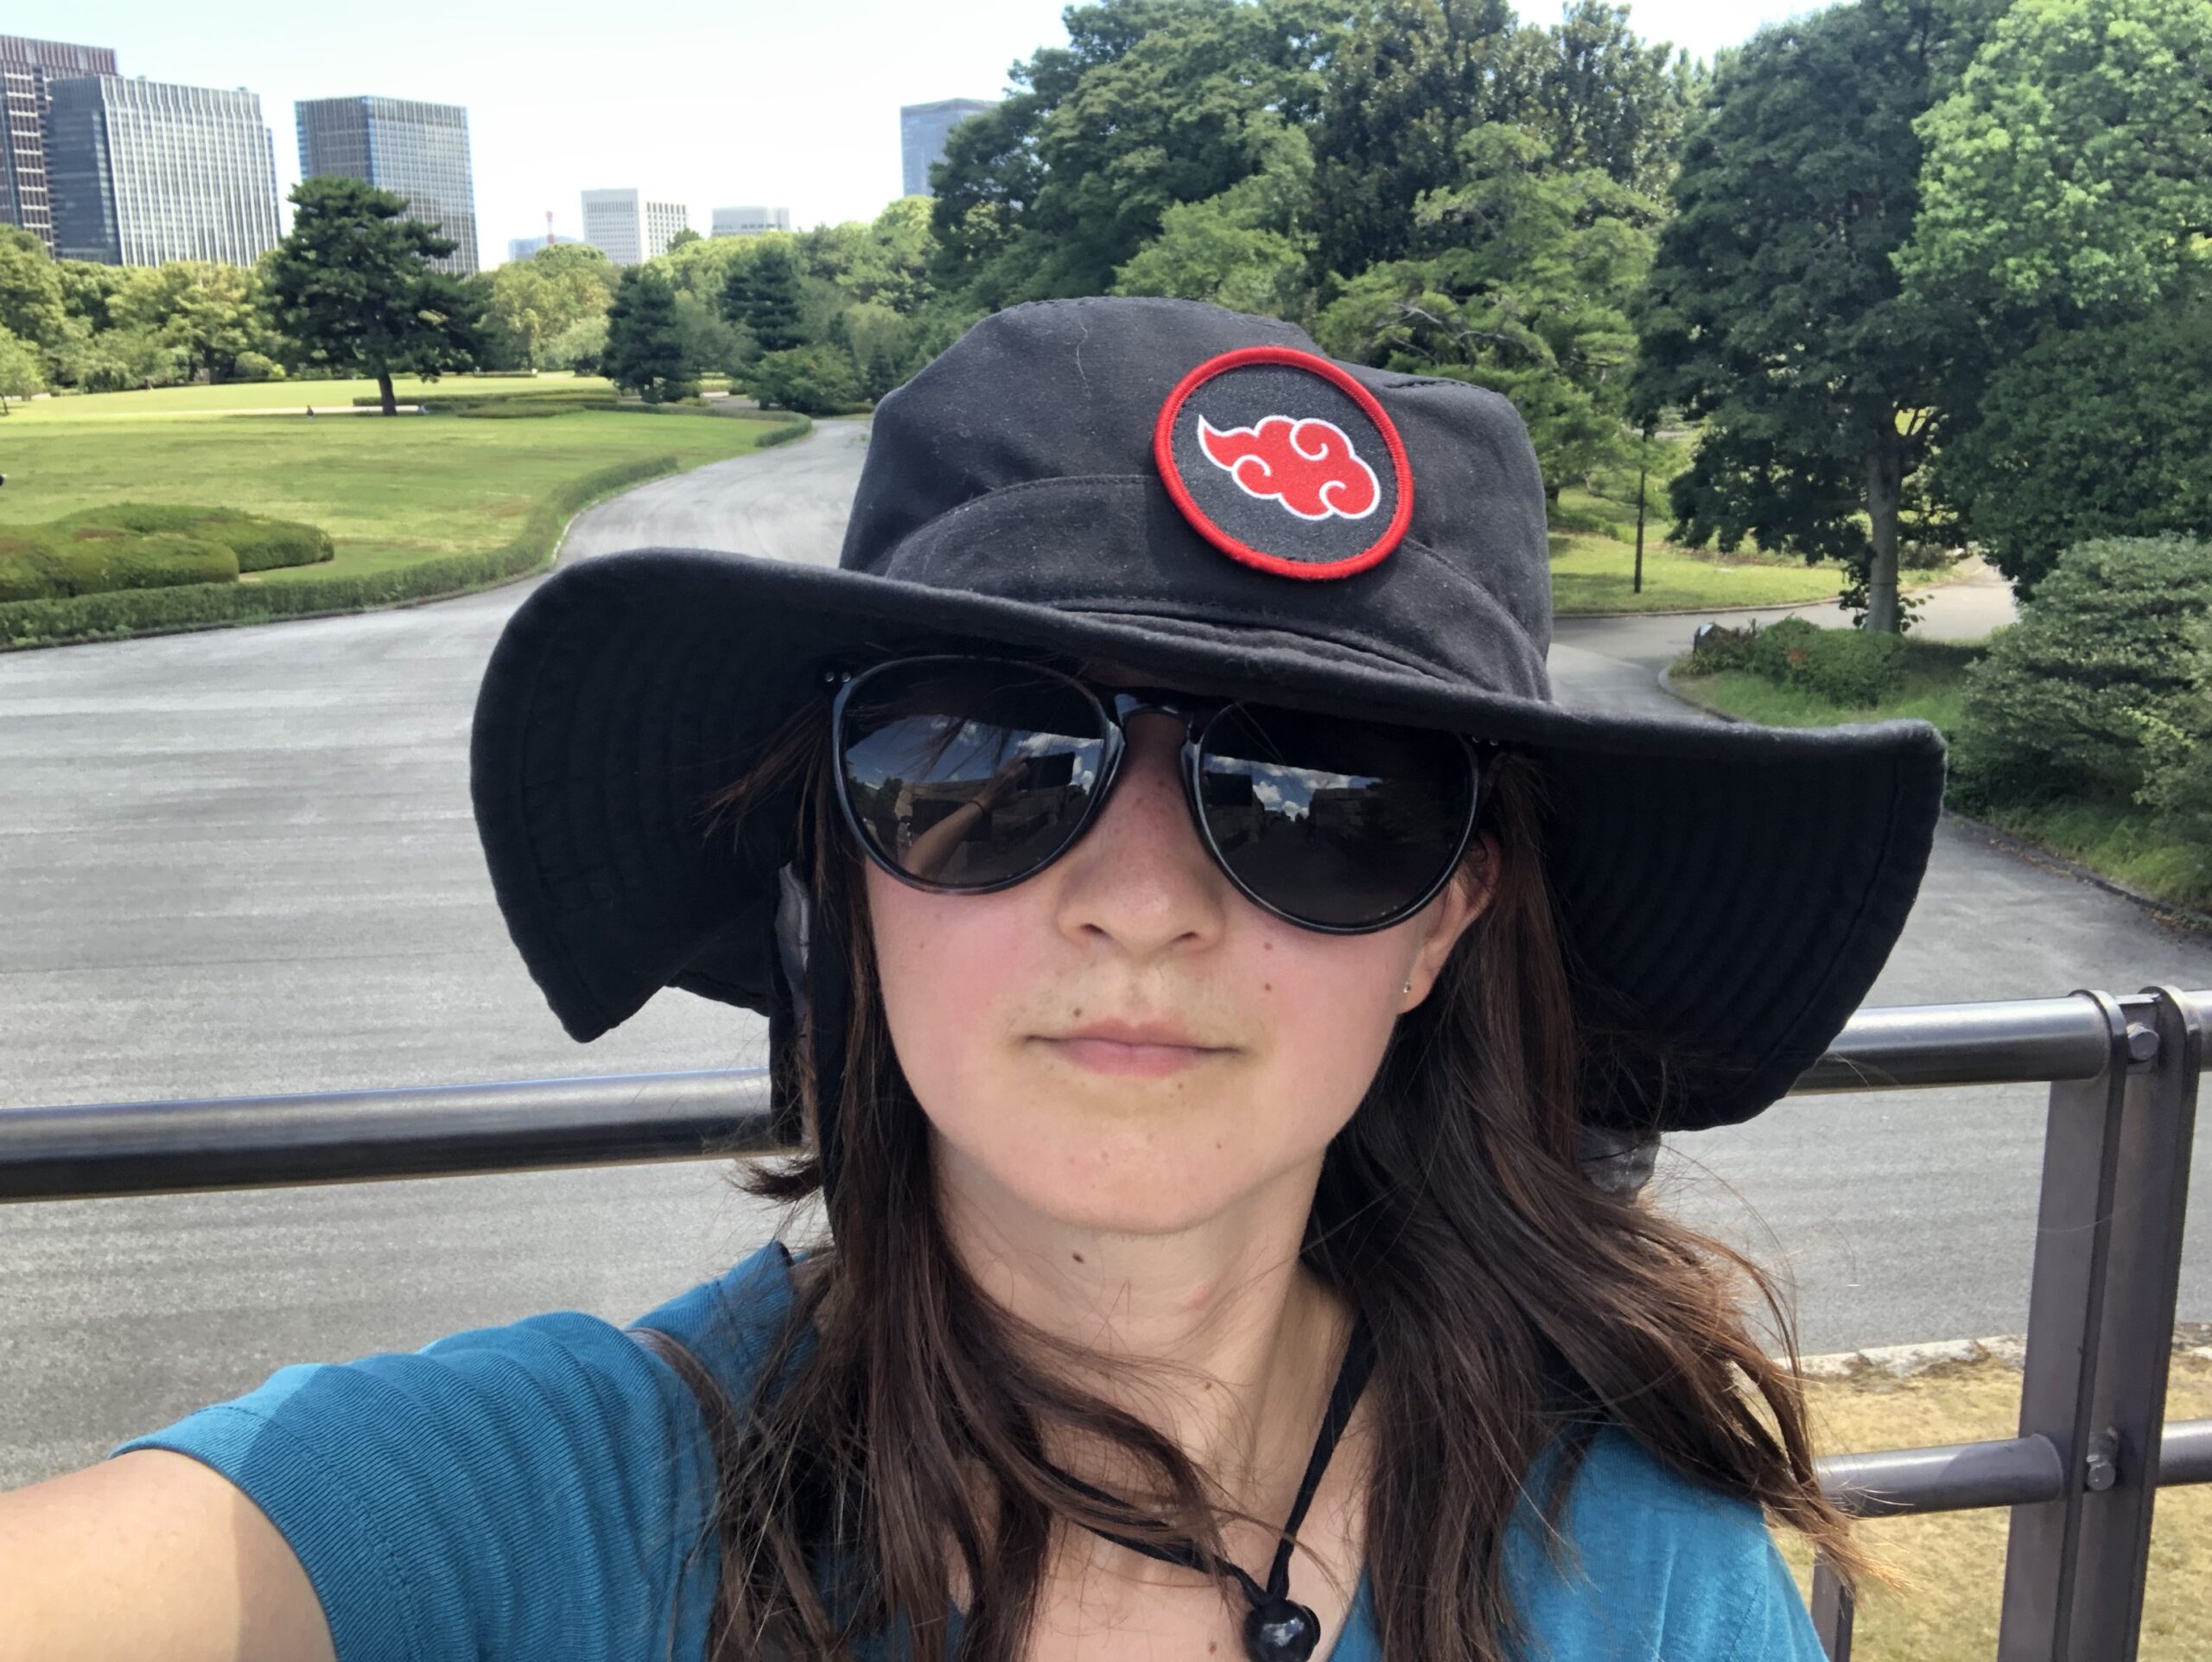 A SELFIE TAKEN AT TOKYO’S IMPERIAL PALACE. NOTICE HOW FLUSHED MY FACE IS!